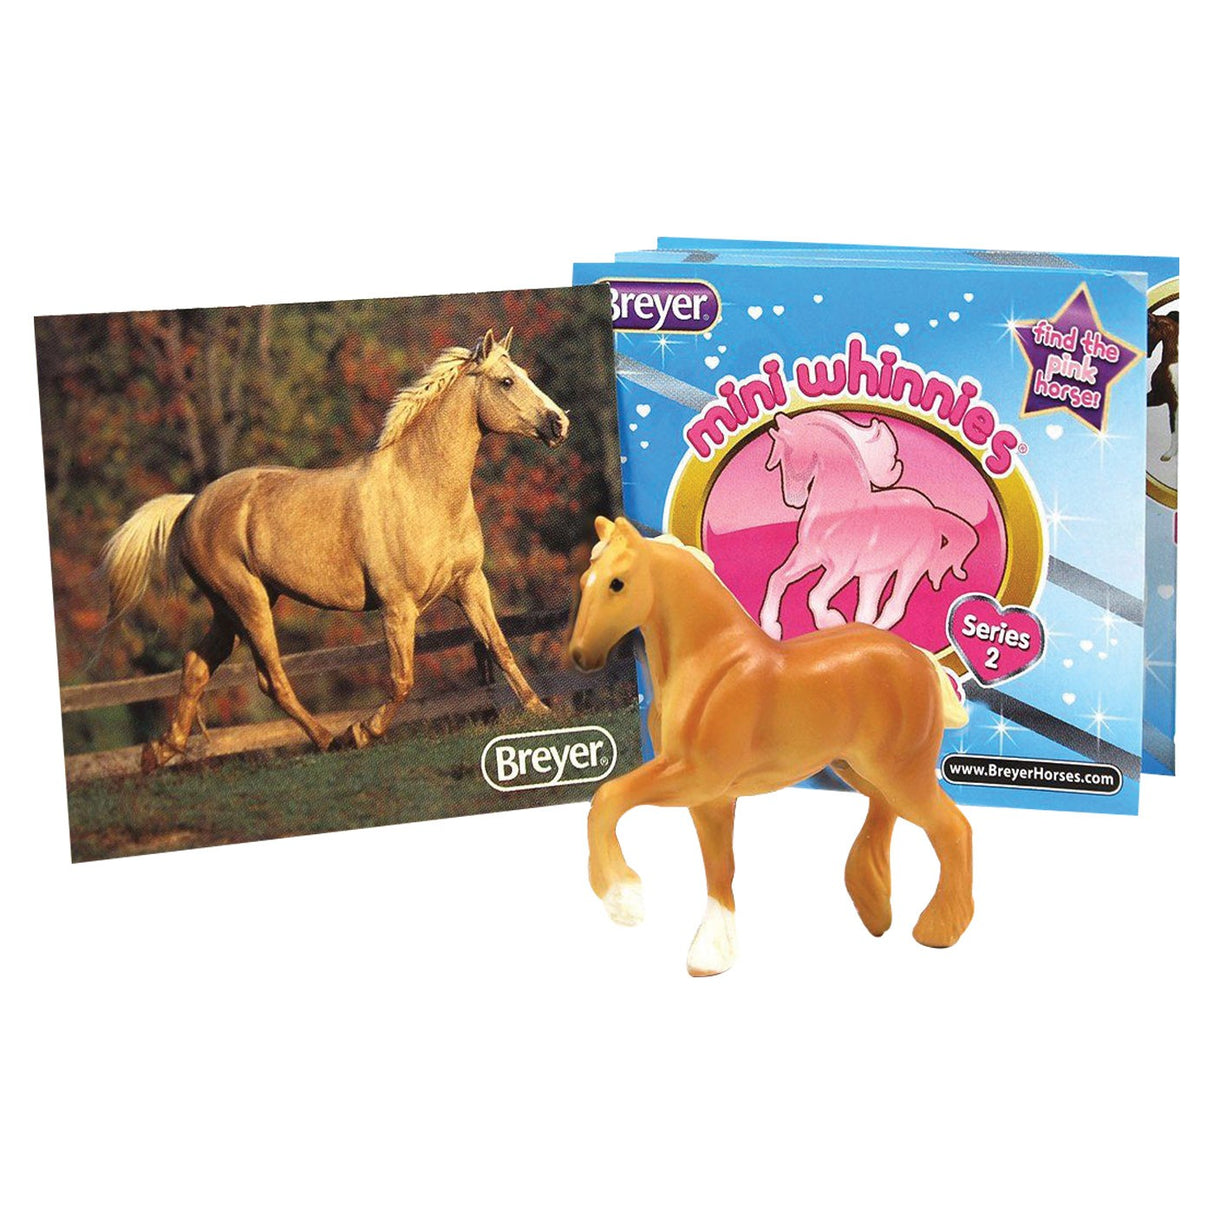 Breyer Mini Whinnies Horse Collection - Series 2